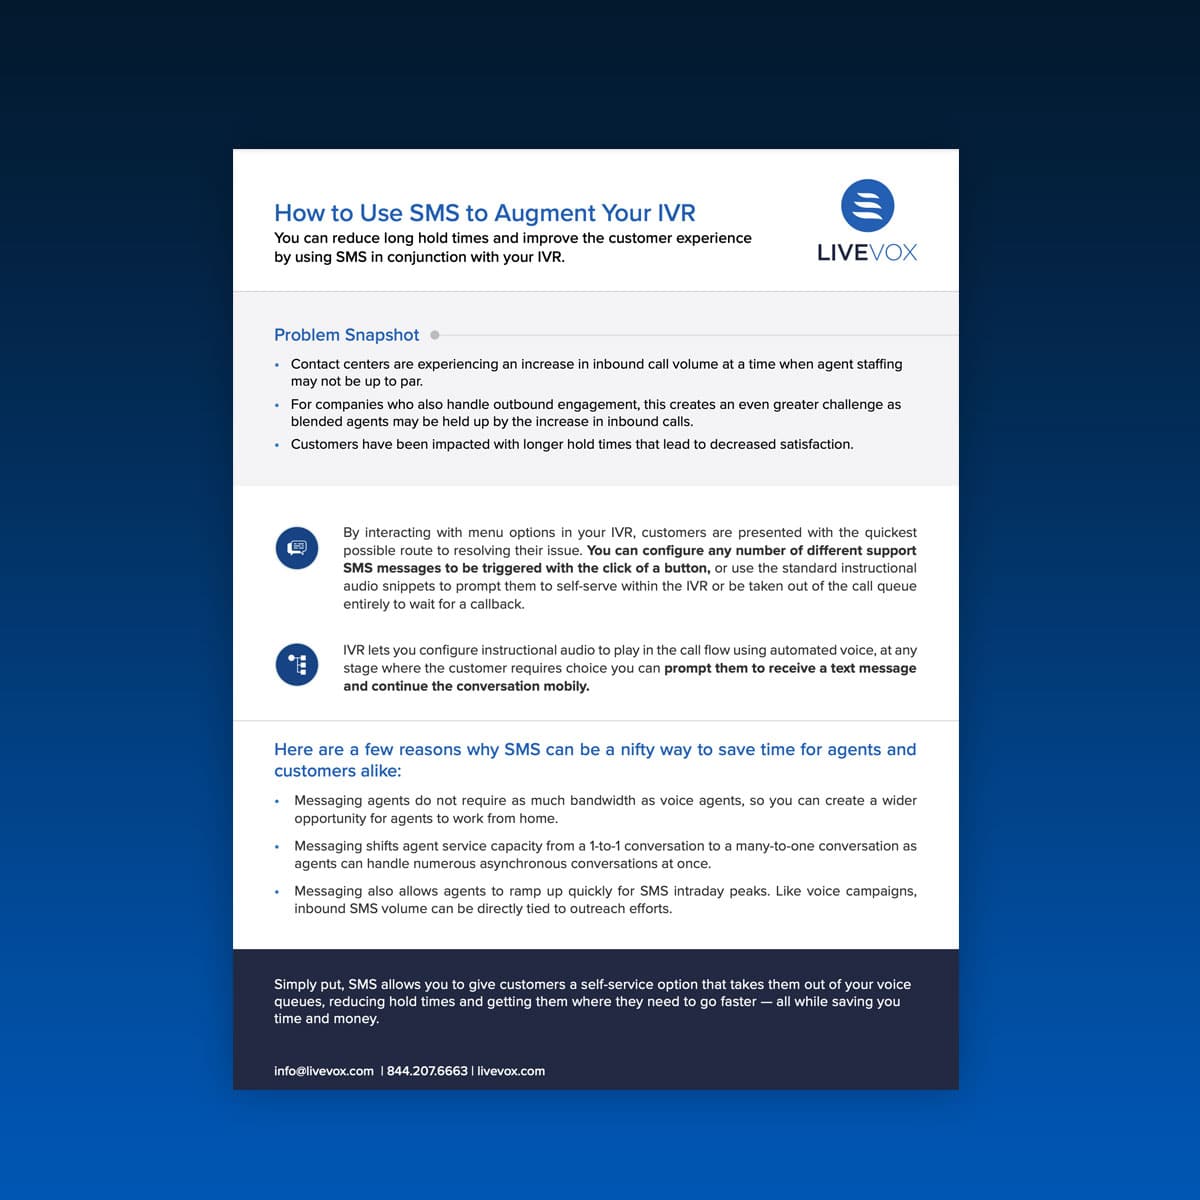 LiveVox Tip Sheet: How to Use SMS to Augment Your IVR